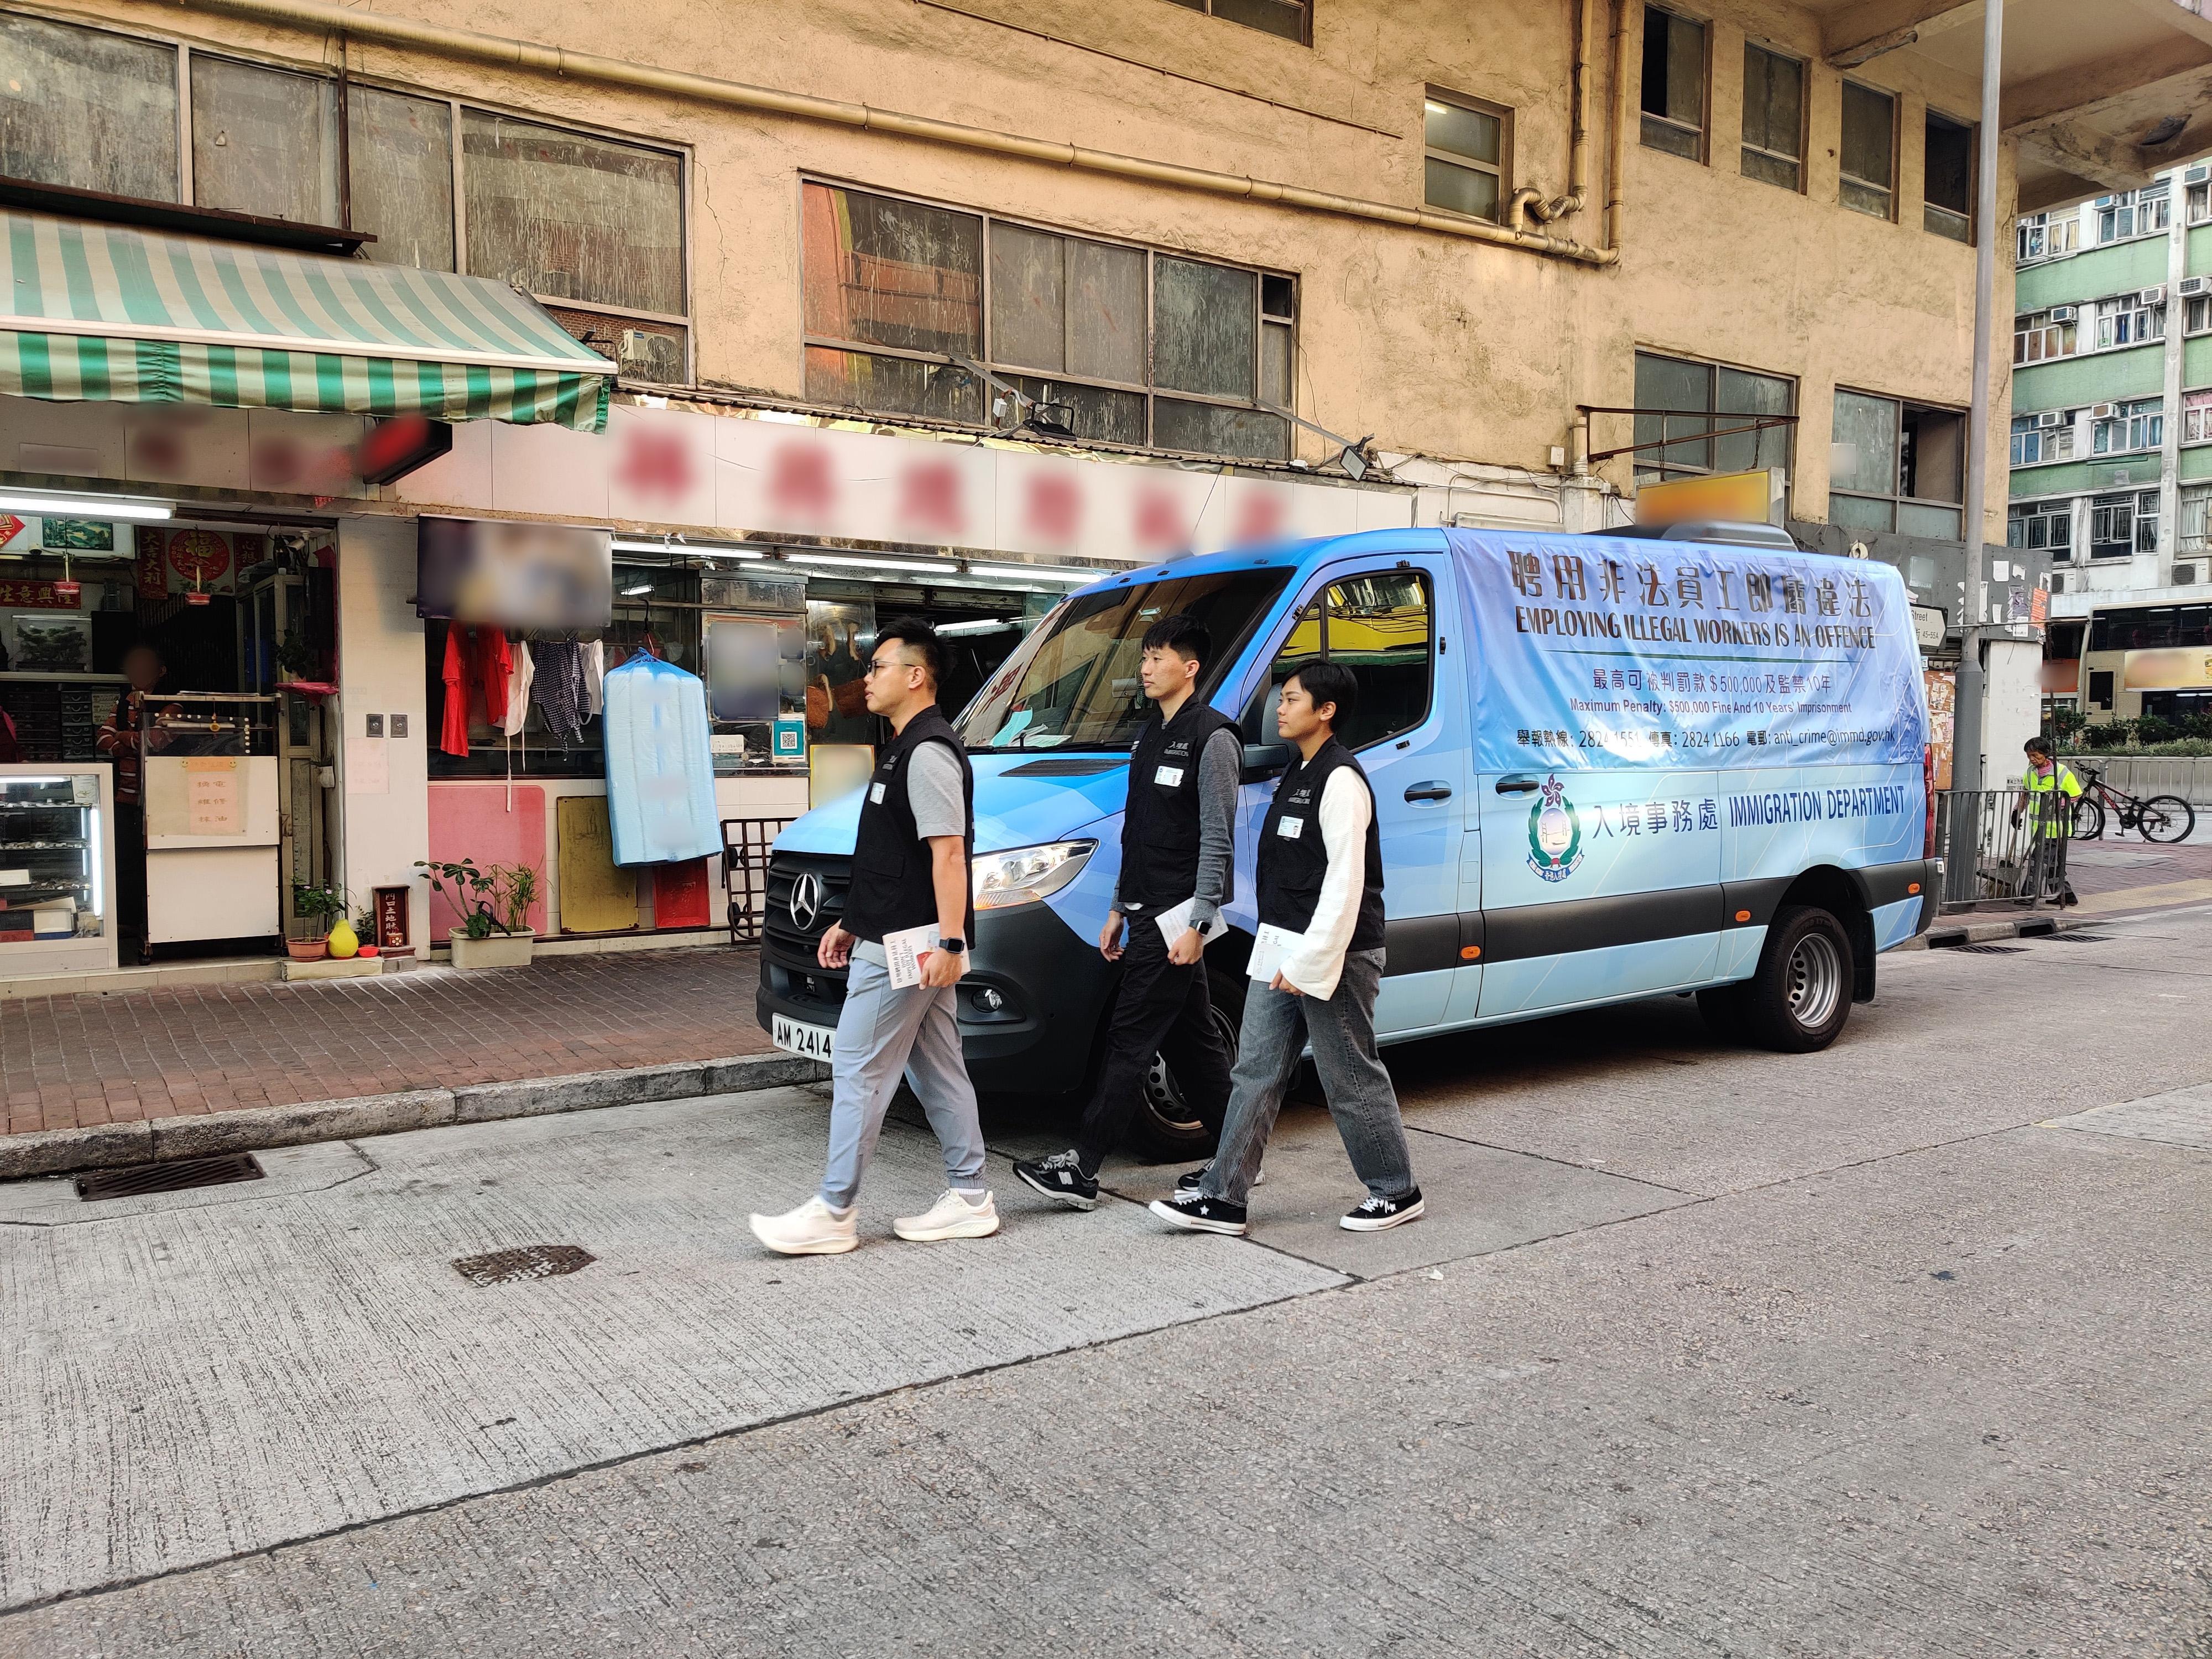 The Immigration Department mounted a series of territory-wide anti-illegal worker operations codenamed "Twilight", and joint operations with the Hong Kong Police Force codenamed "Champion" and "Windsand", for four consecutive days from November 13 to yesterday (November 16). Photo shows the department's promotional vehicle broadcasting the message of "Employing Illegal Workers Is an Offence".